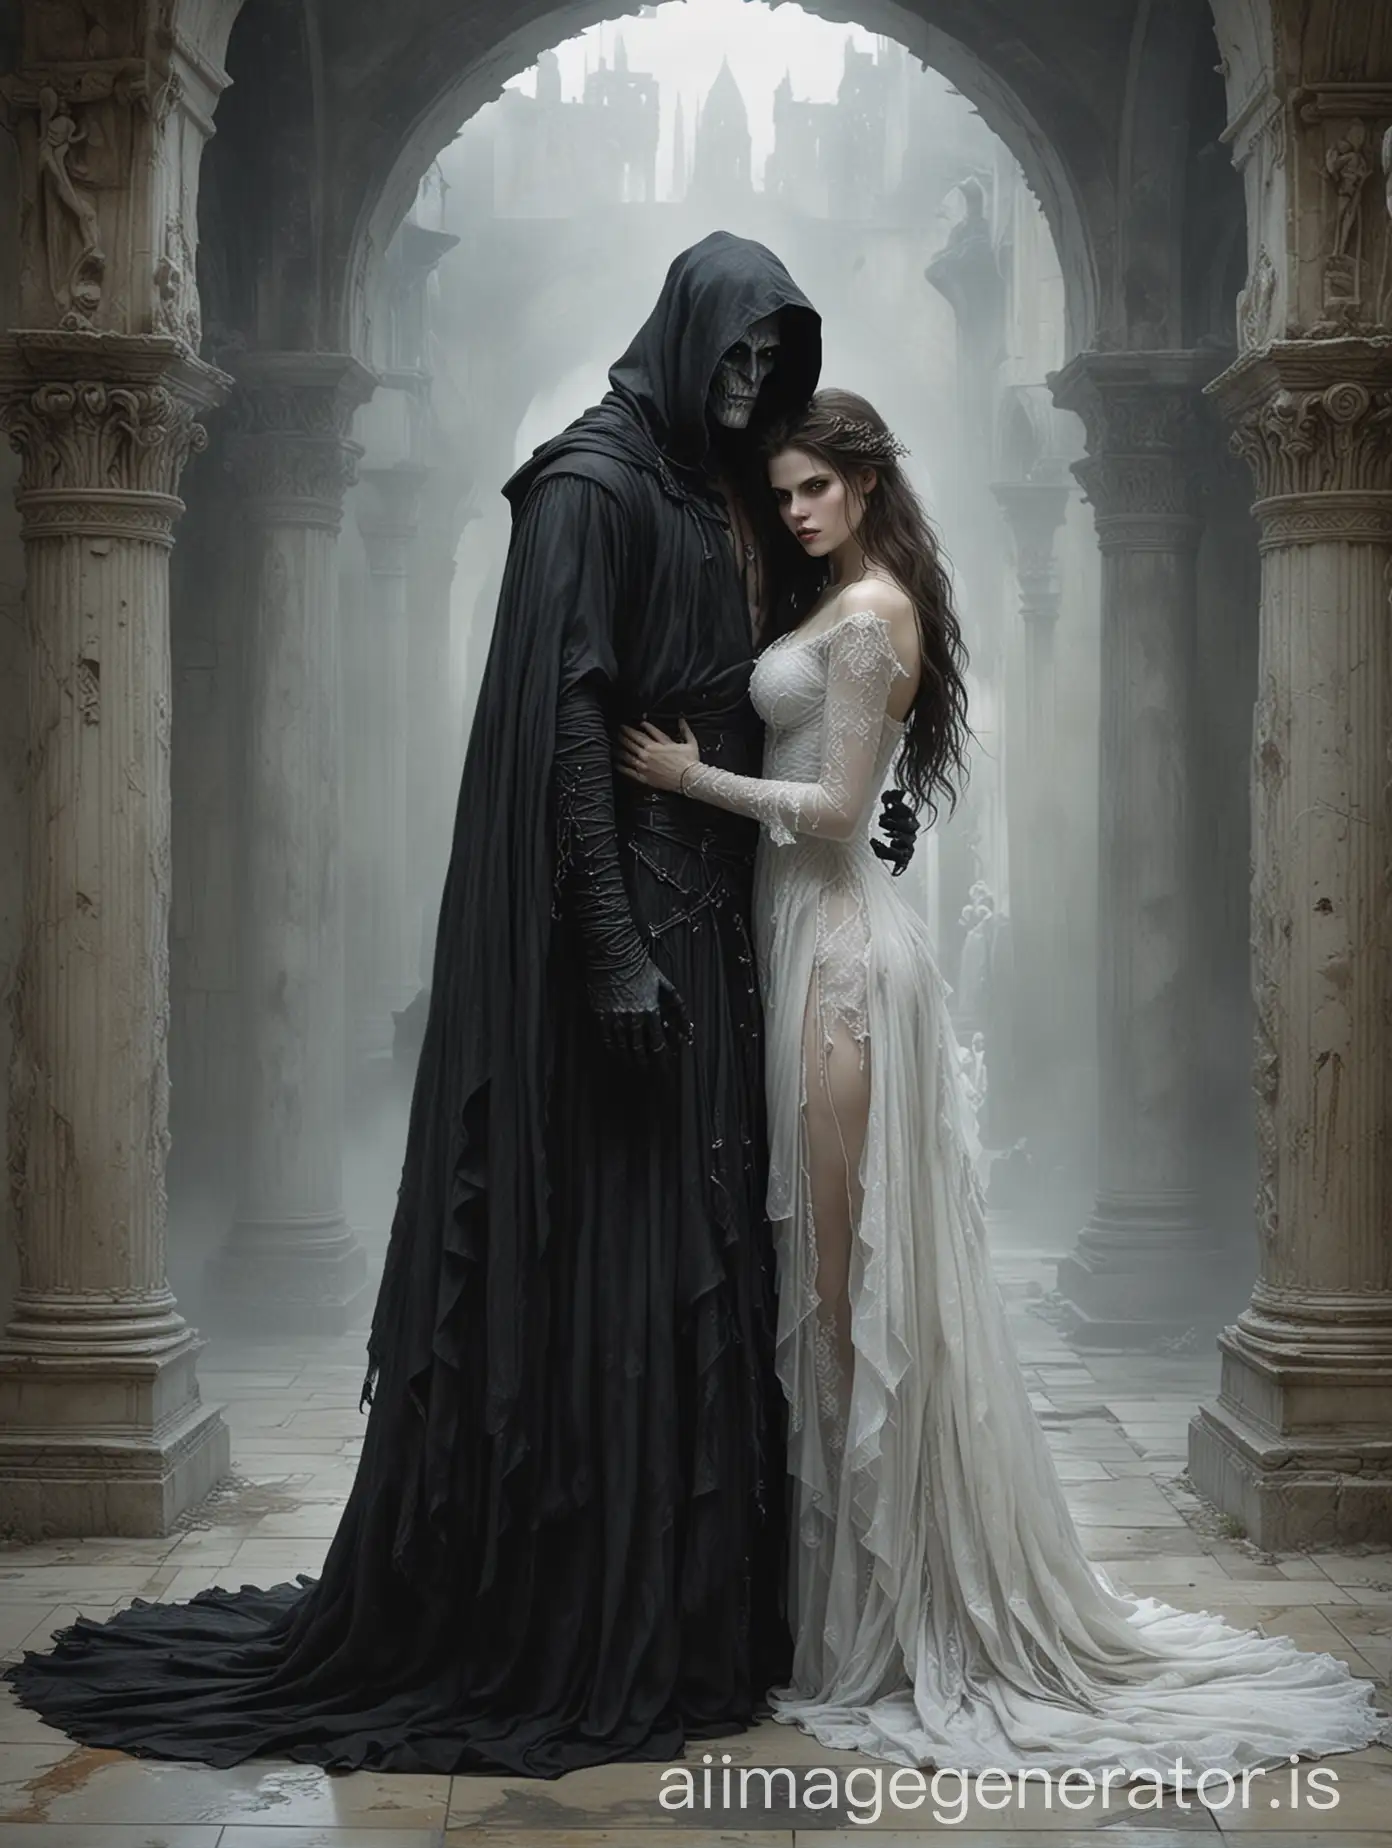 luis royo dark art style, alexandra daddario face, wedding couple of woman and demon, woman in an embrace with a tall man demon creature in black hood, raggedy wedding dress translucent, innocent woman wedding with a demon, standing on a marble floor, ancient ruins blurry foggy background